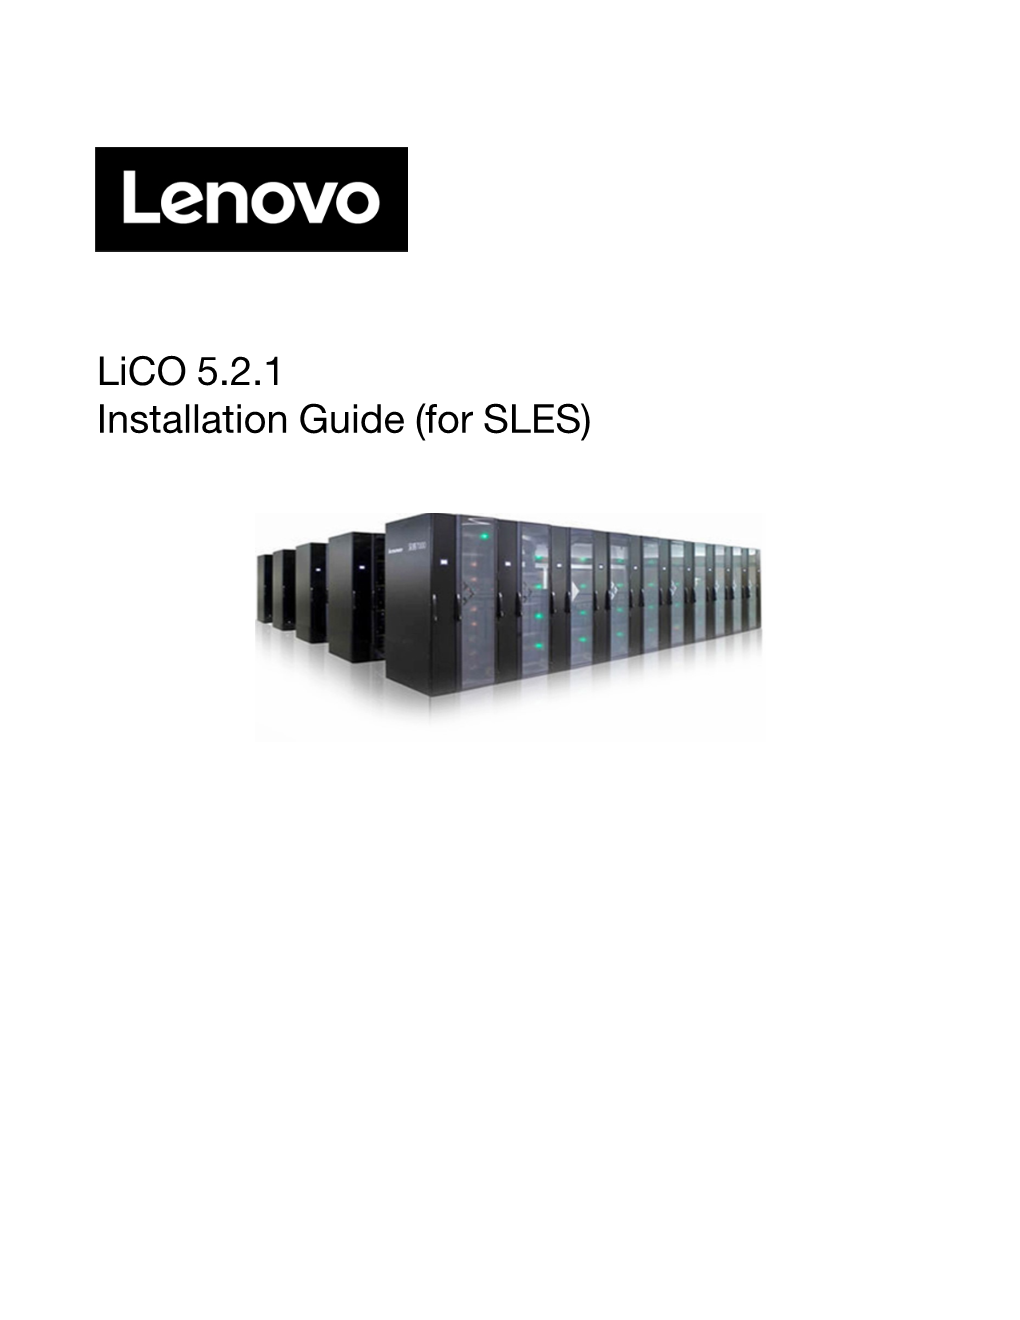 Lico 5.2.1 Installation Guide (For SLES) Second Edition (January 2019)